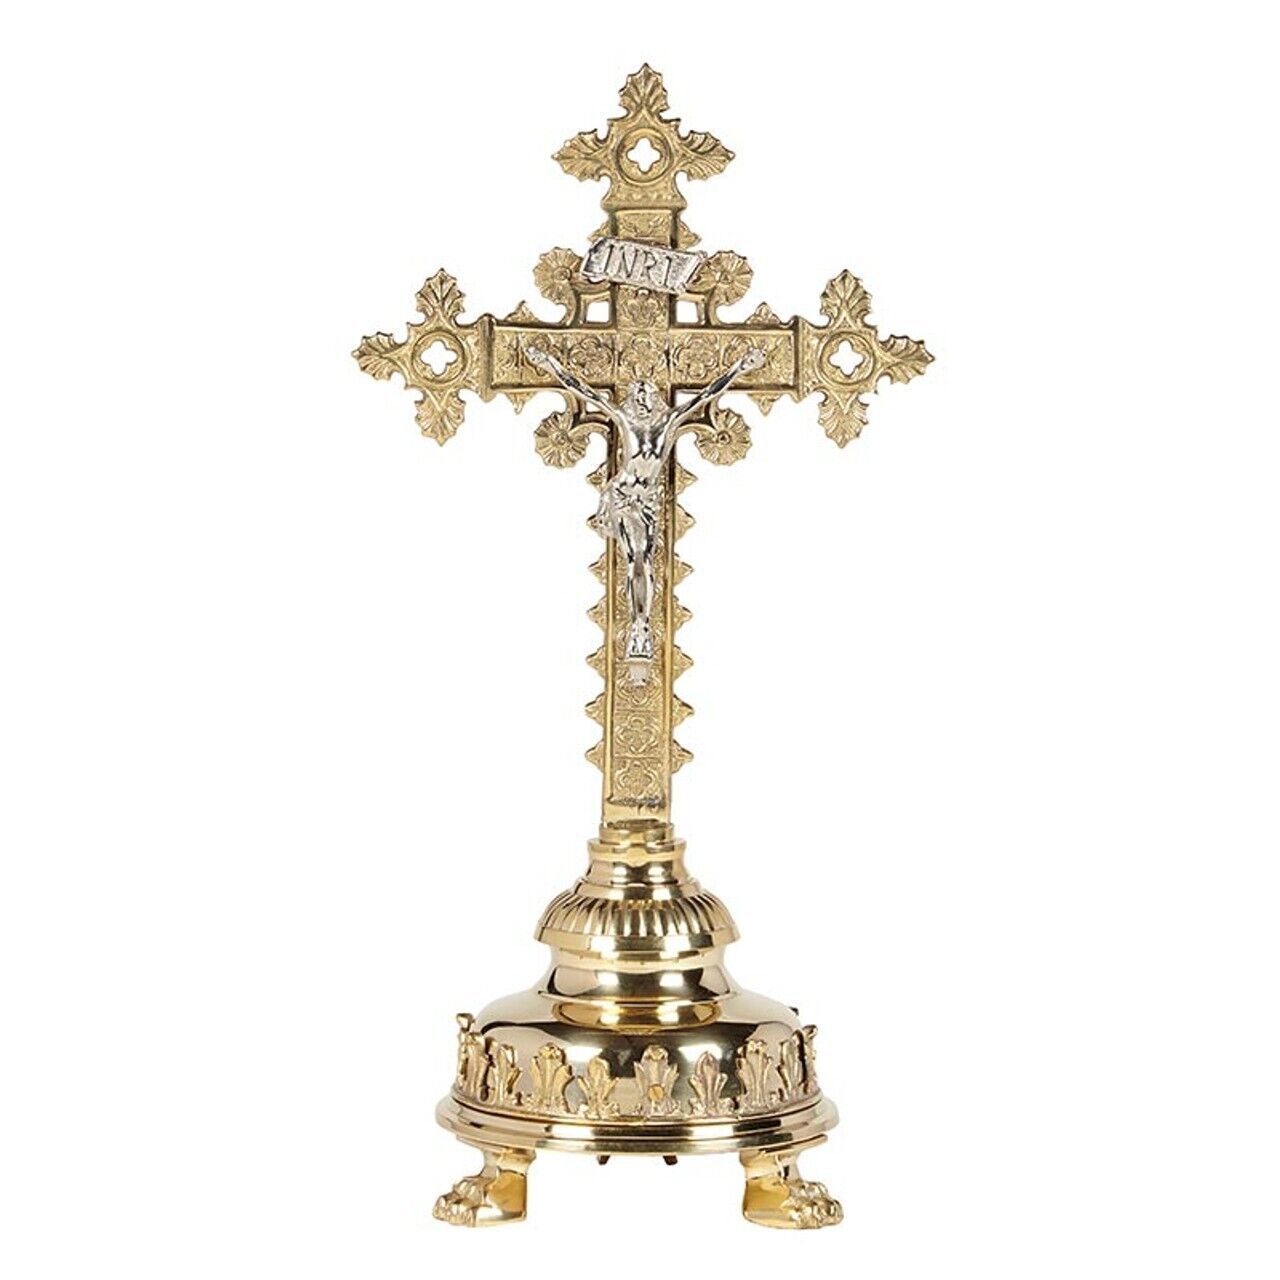 Two Tone Nickel Plated Brass Notre Dame Altar Crucifix For Churches 17 1/2 In